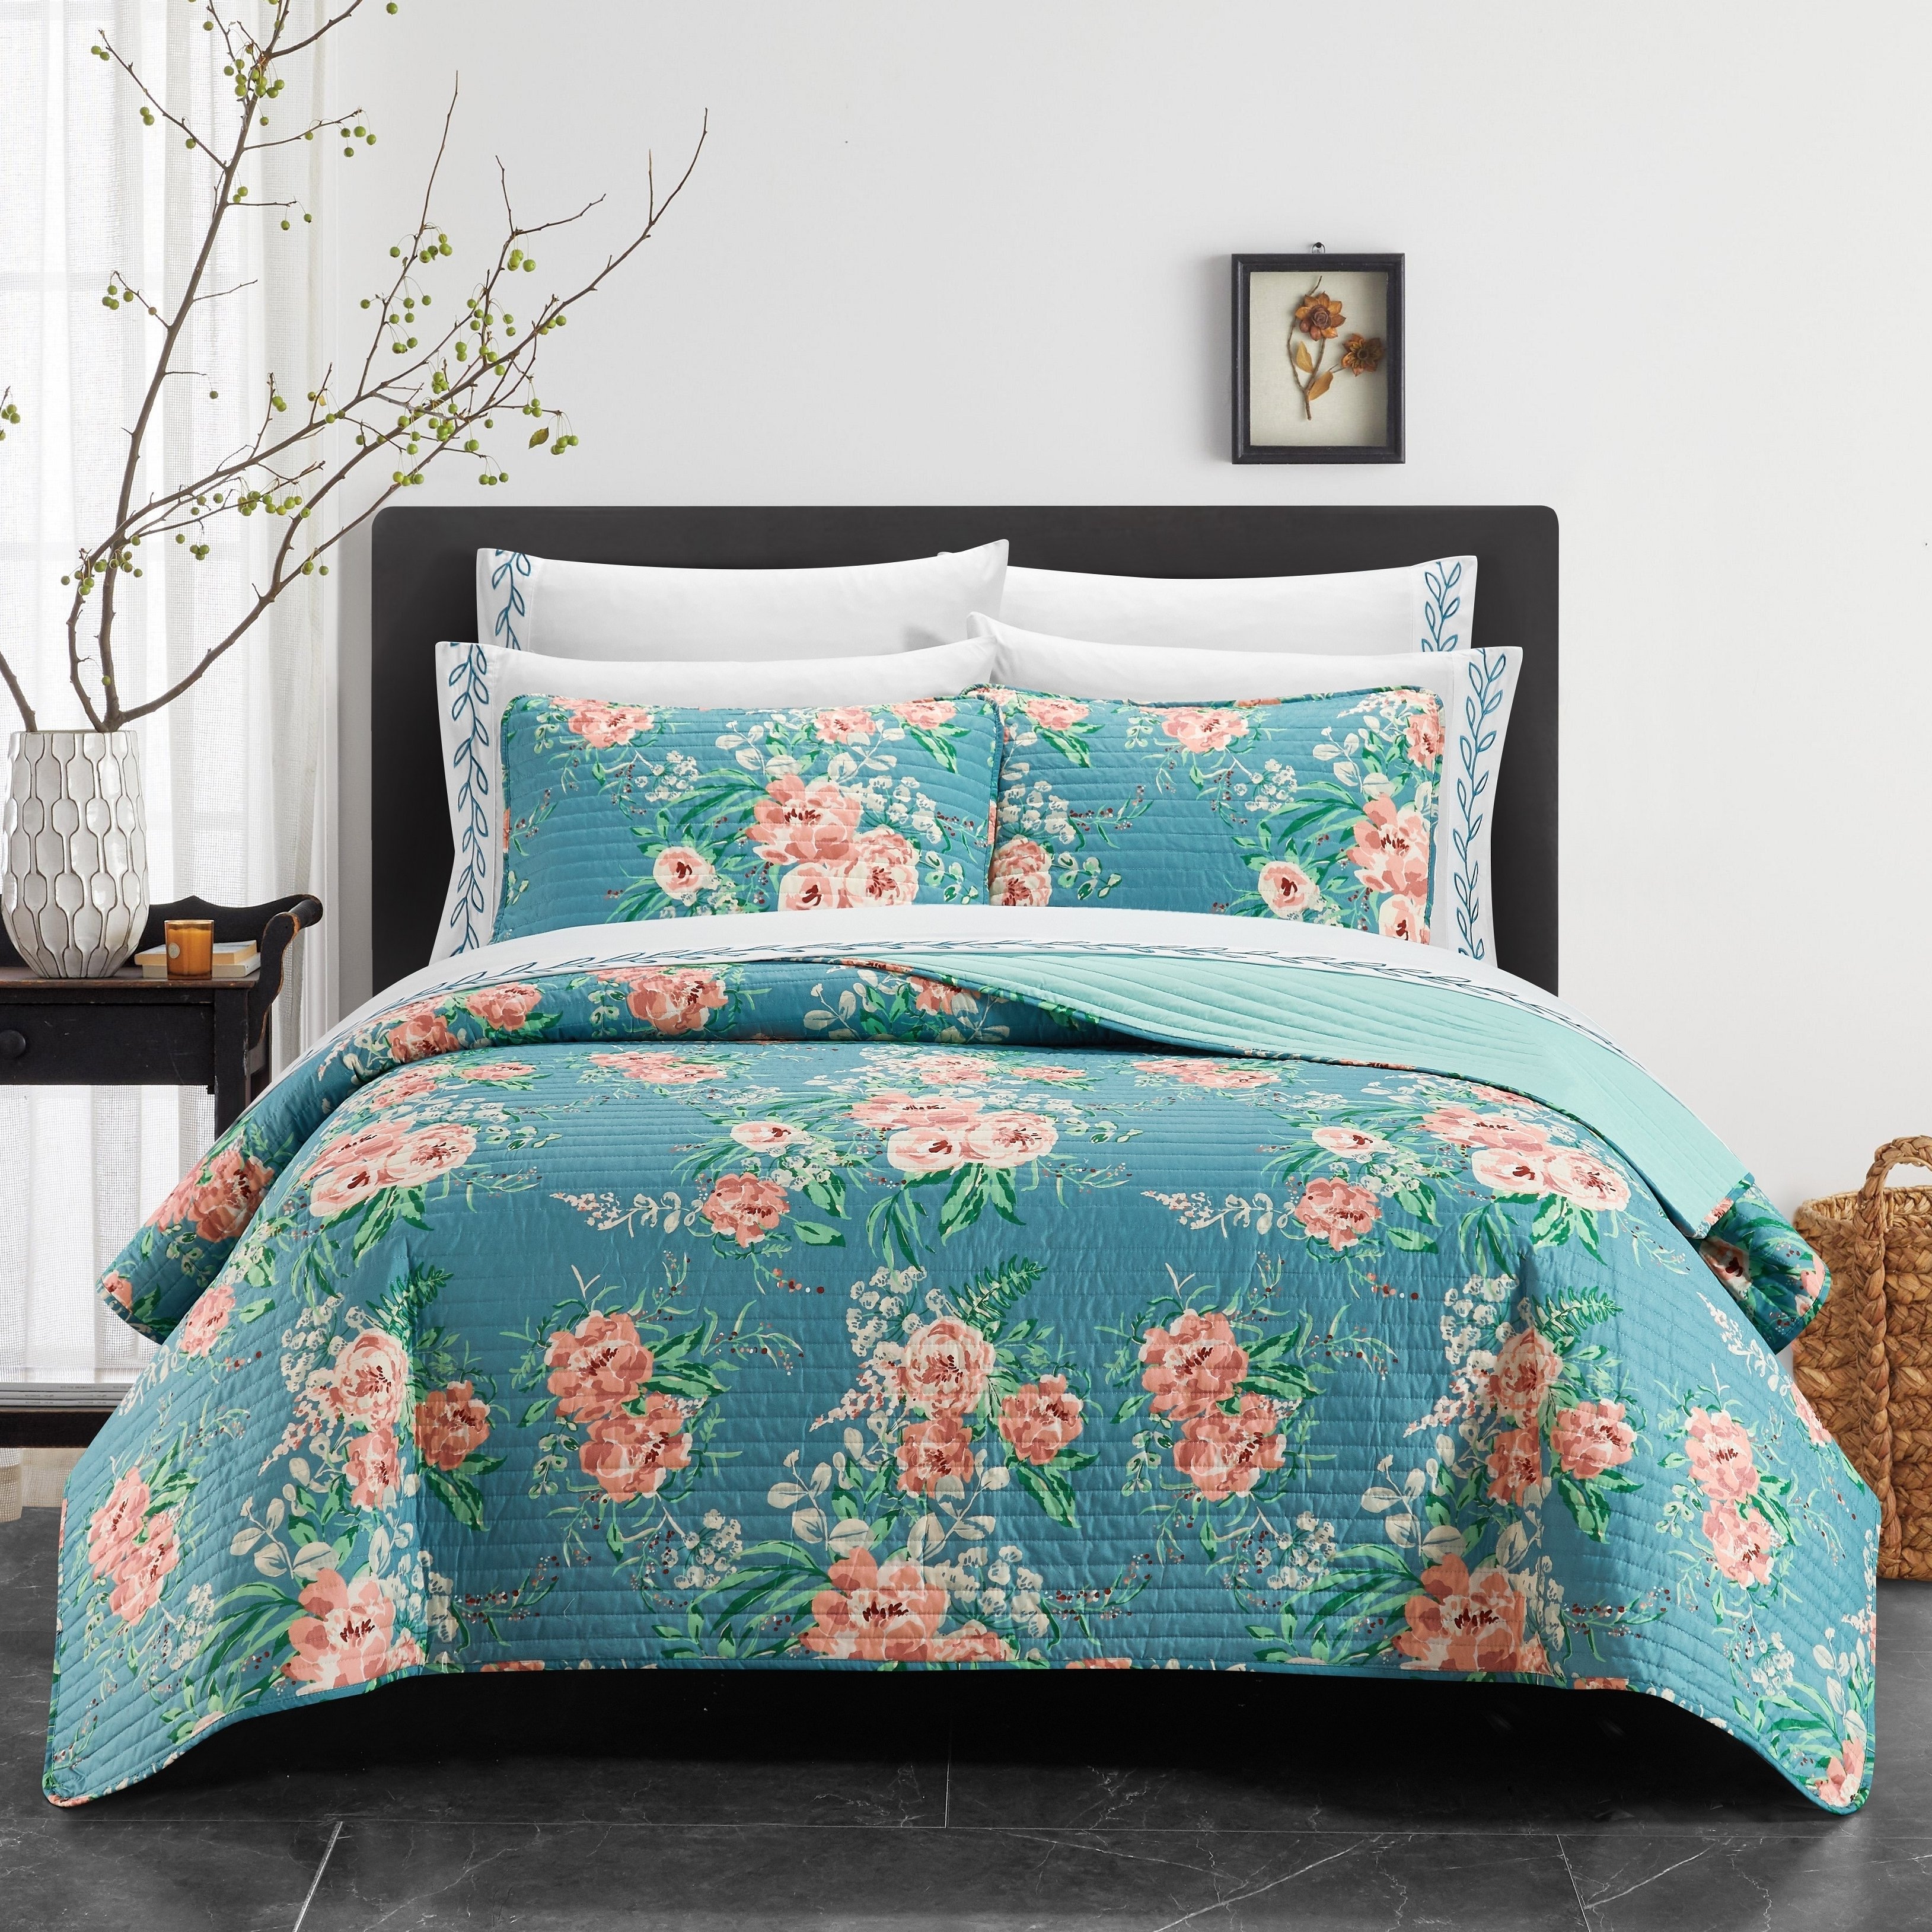 Palm Spring 9 Or 6 Piece Quilt Set Watercolor Floral Pattern Print Bed In A Bag - Aqua, Queen